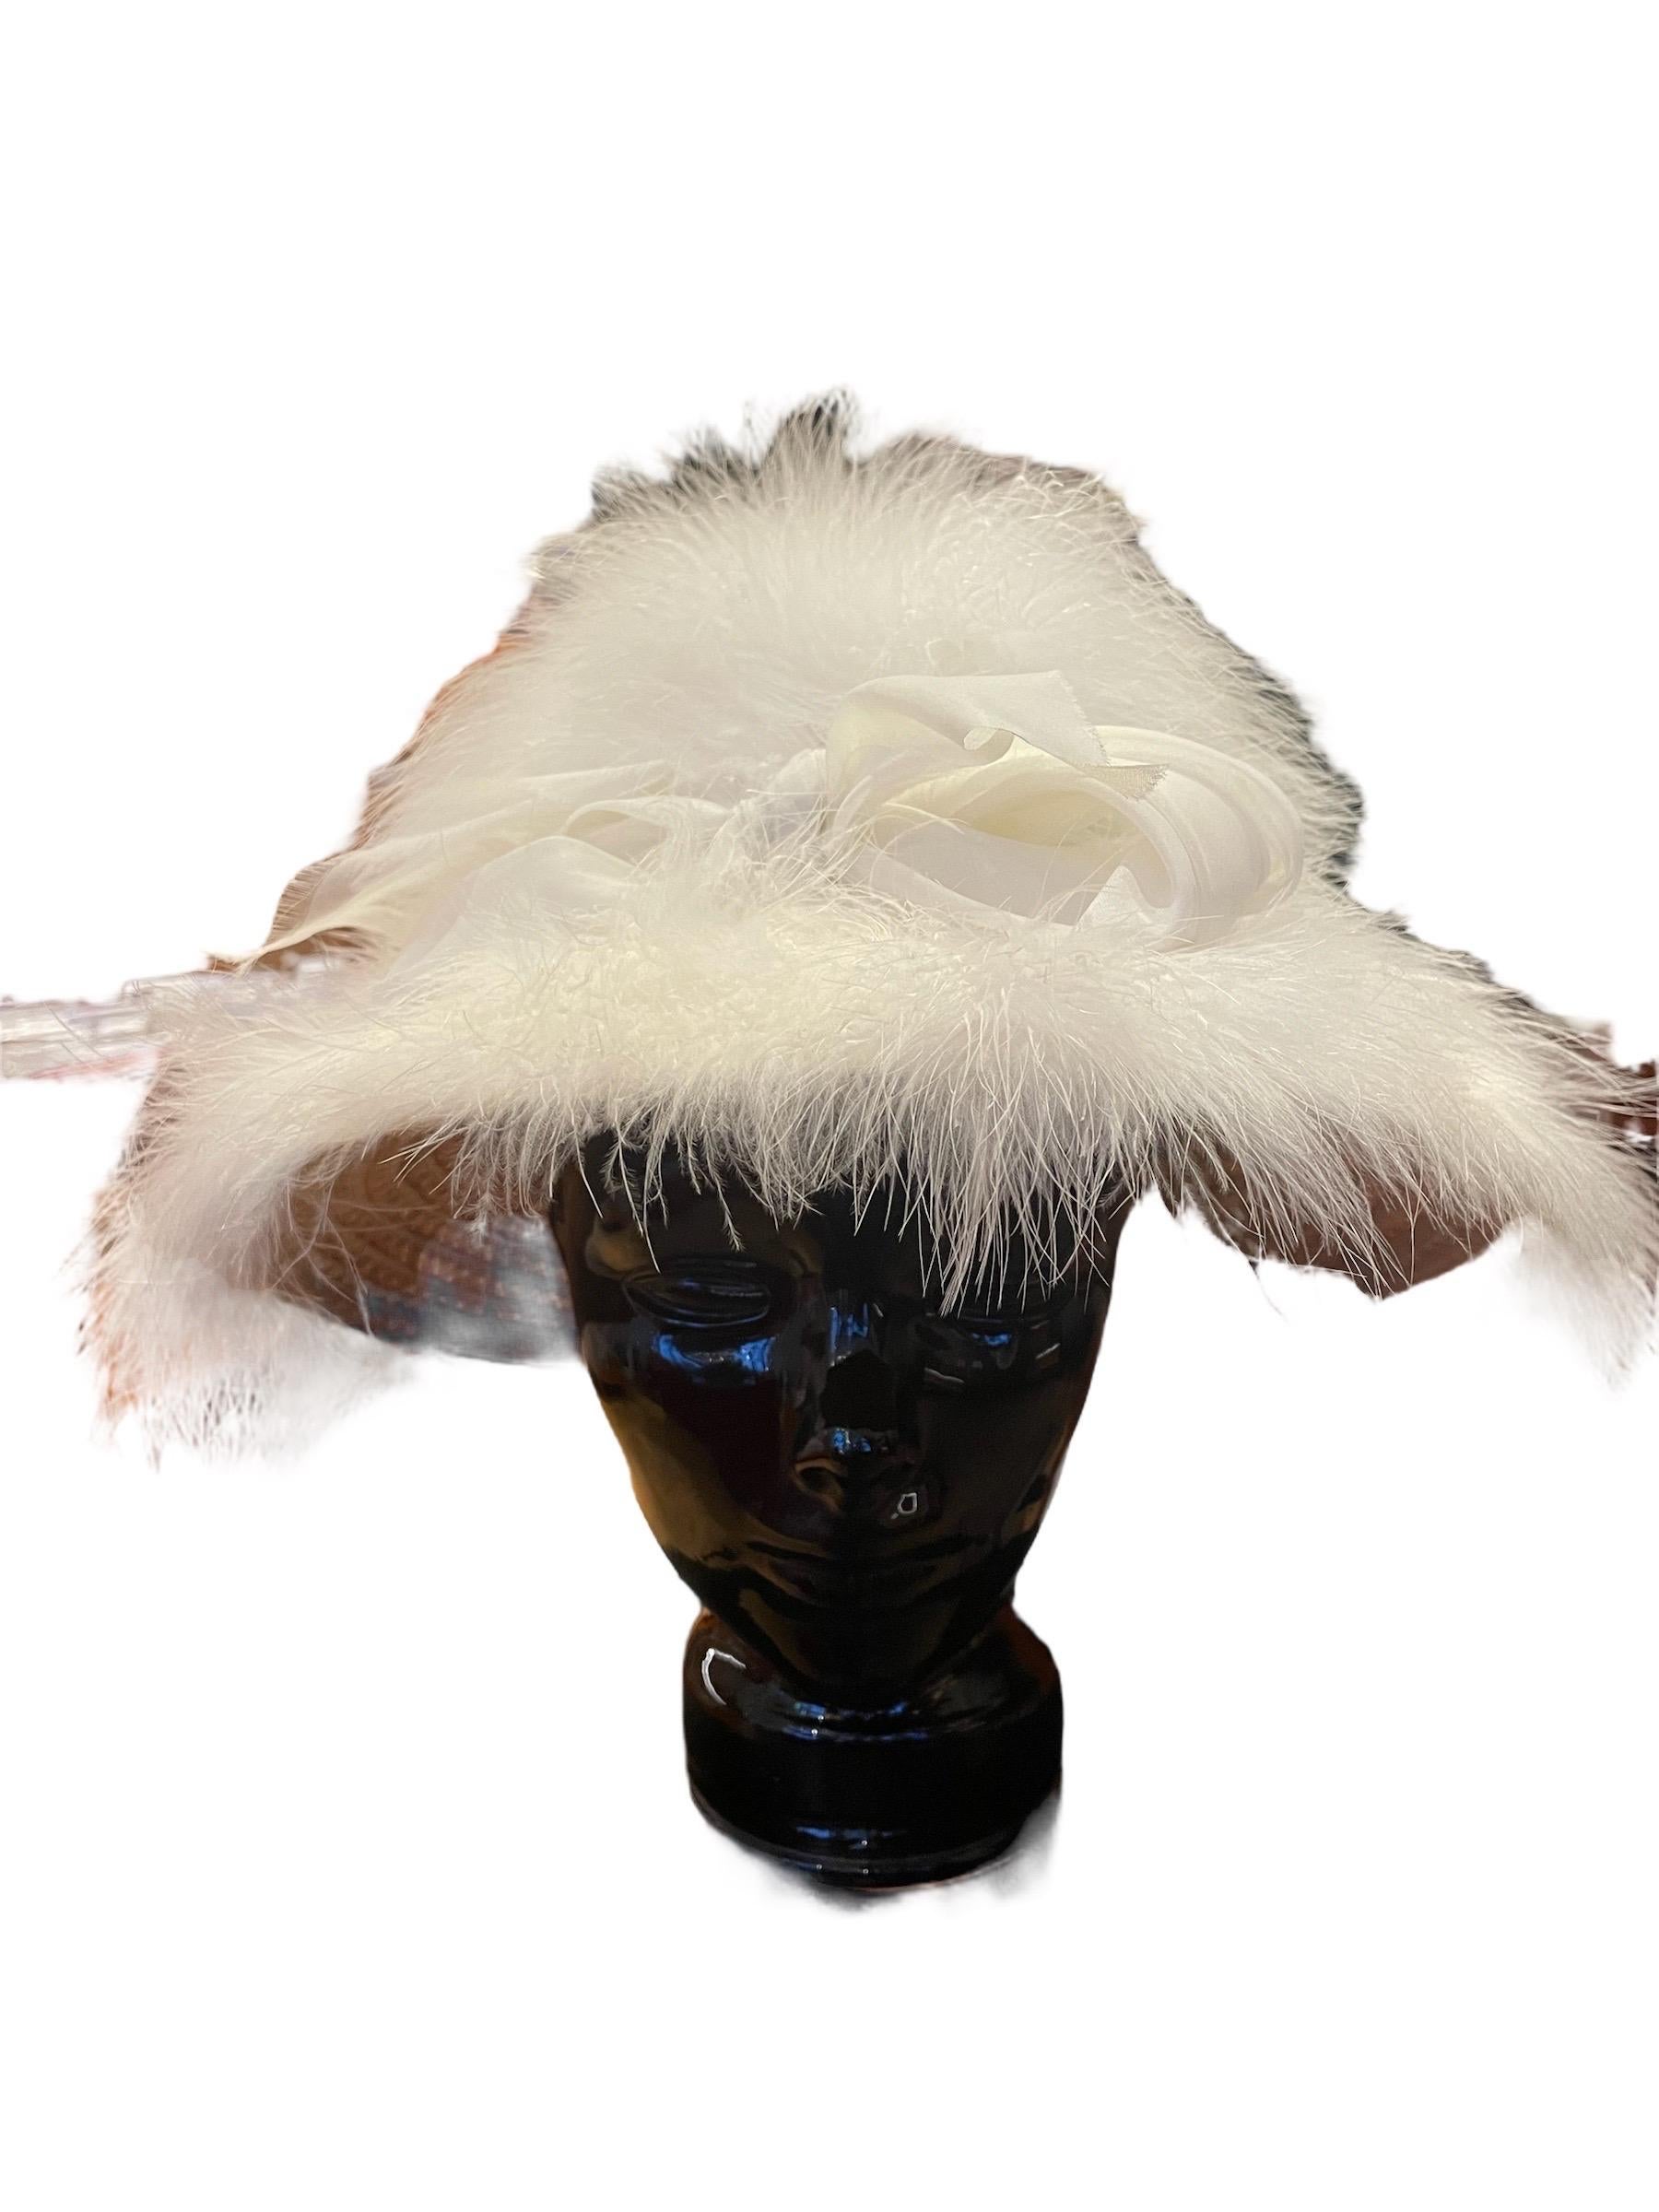 1960s White Ostrich Feather Fabulous Hat 

A super fun 60's ostrich feather hat by the company 